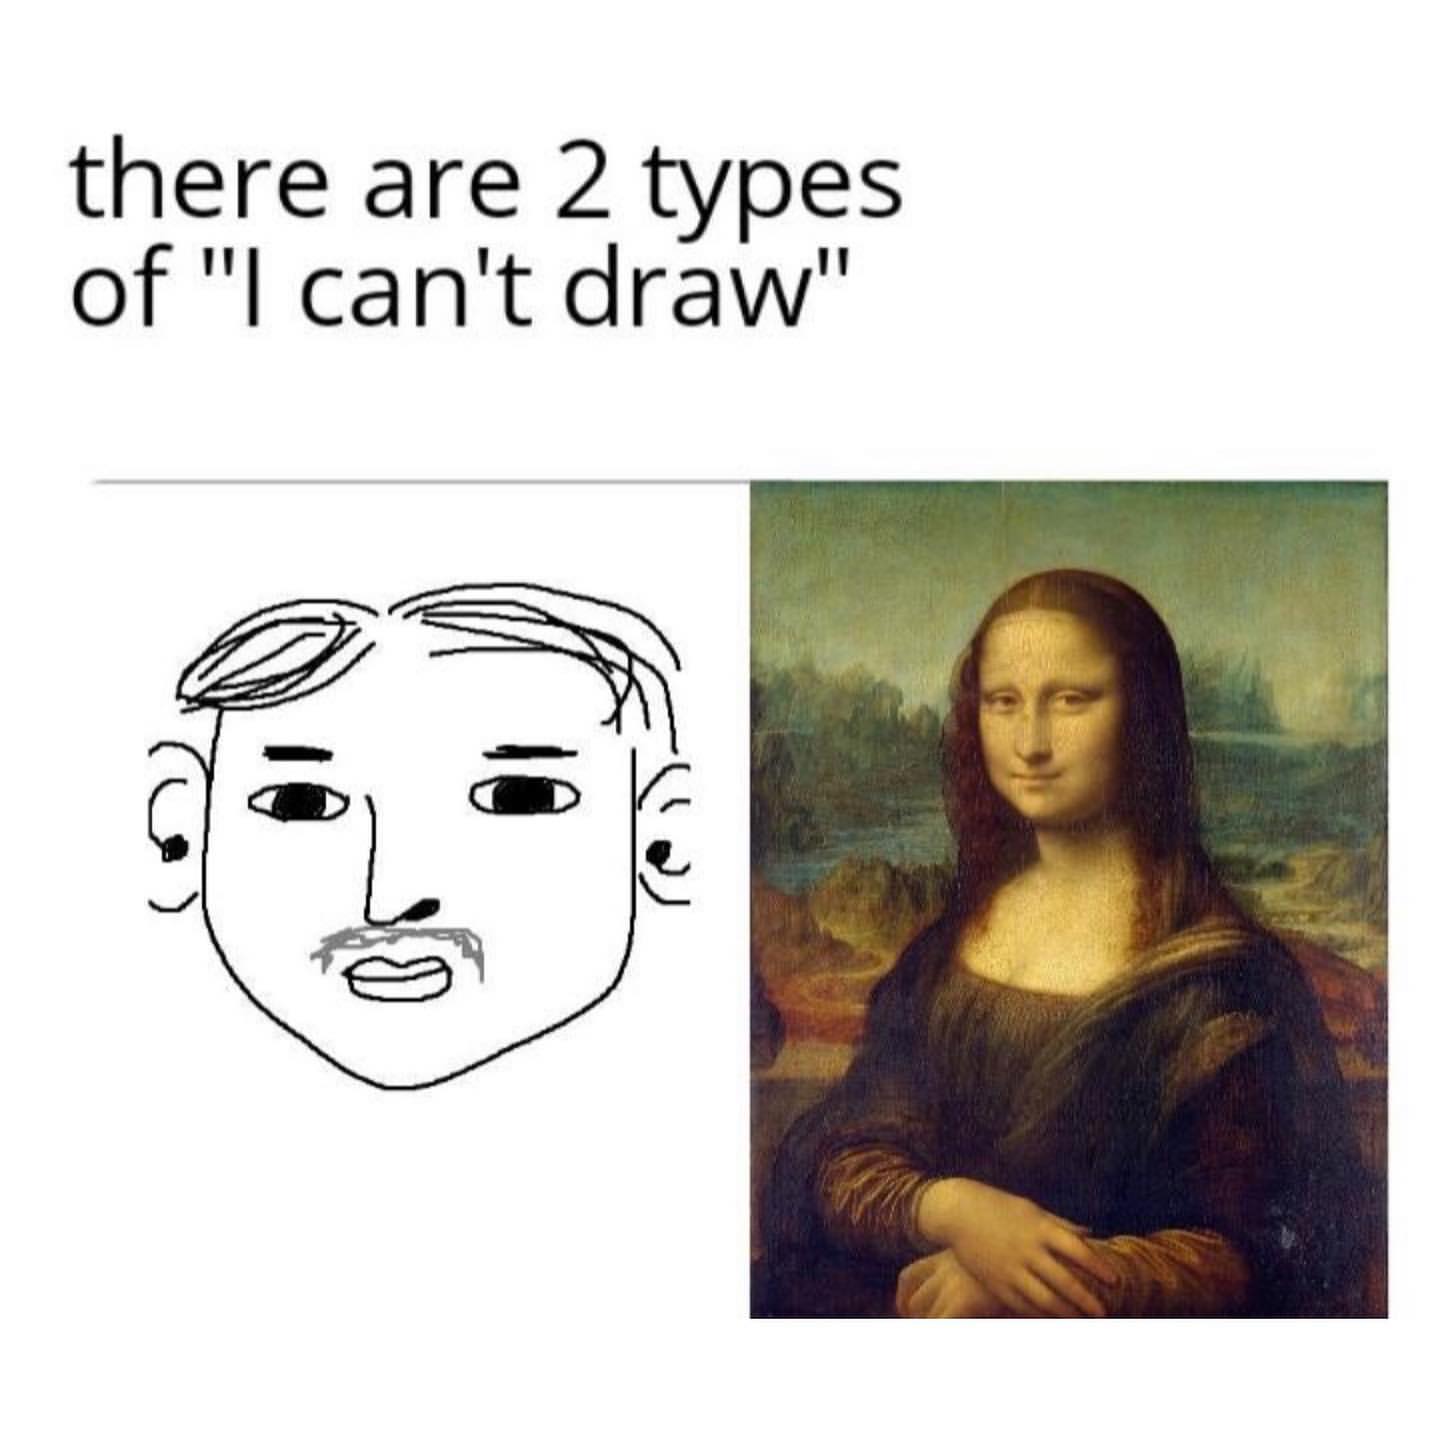 There are 2 types of "I can't draw".